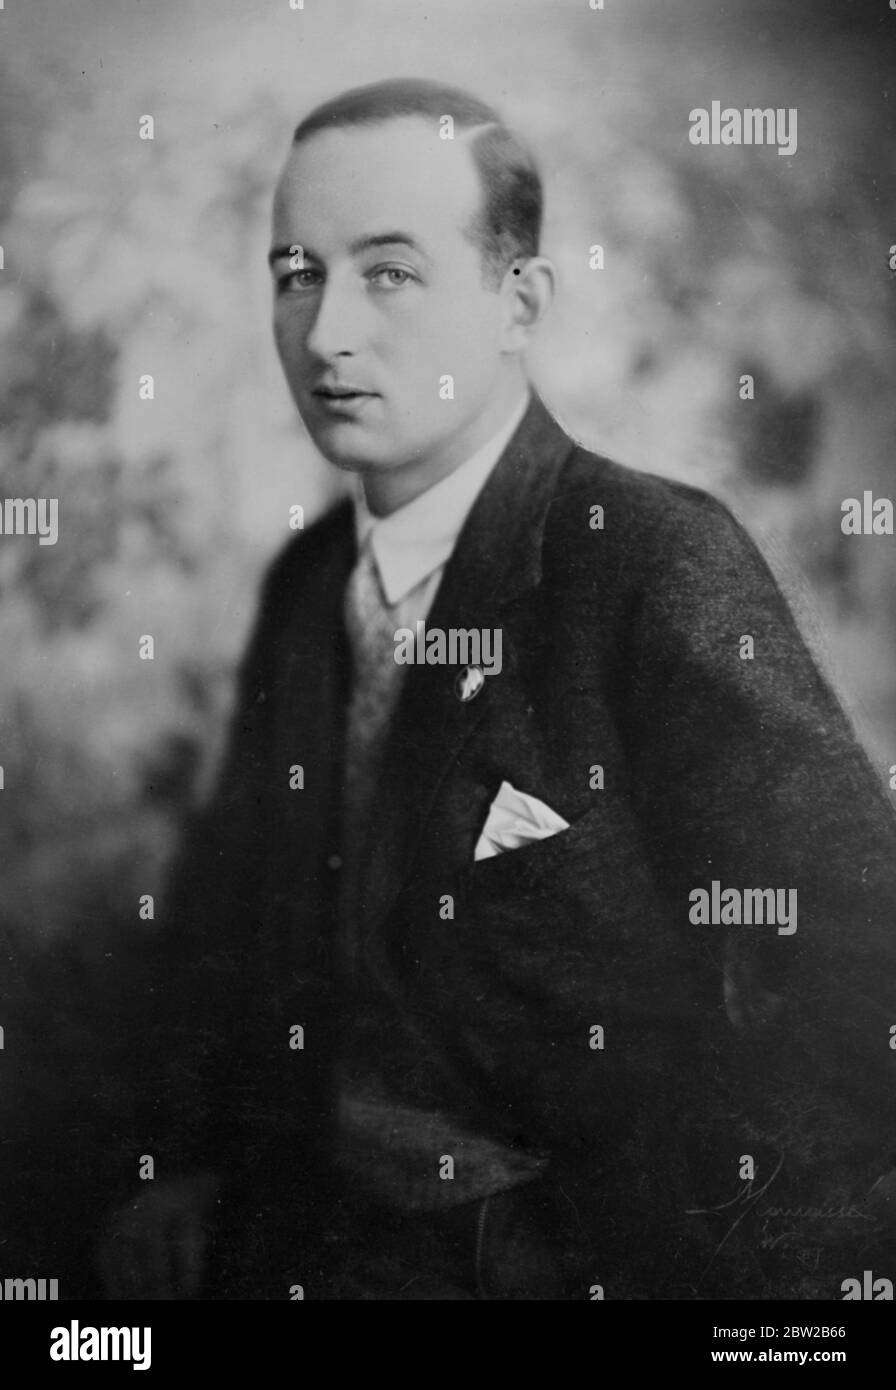 Prince Ernst-Rudiger von Starhemberg who attended a coup d'Ã©tat in Austria. [Ernst RÃ¼diger Camillo Starhemberg - Austrian nationalist and conservative politician, a leader of the Heimwehr and later of the Christian Social Party / Fatherland's Front.] 16 September 1931 Stock Photo